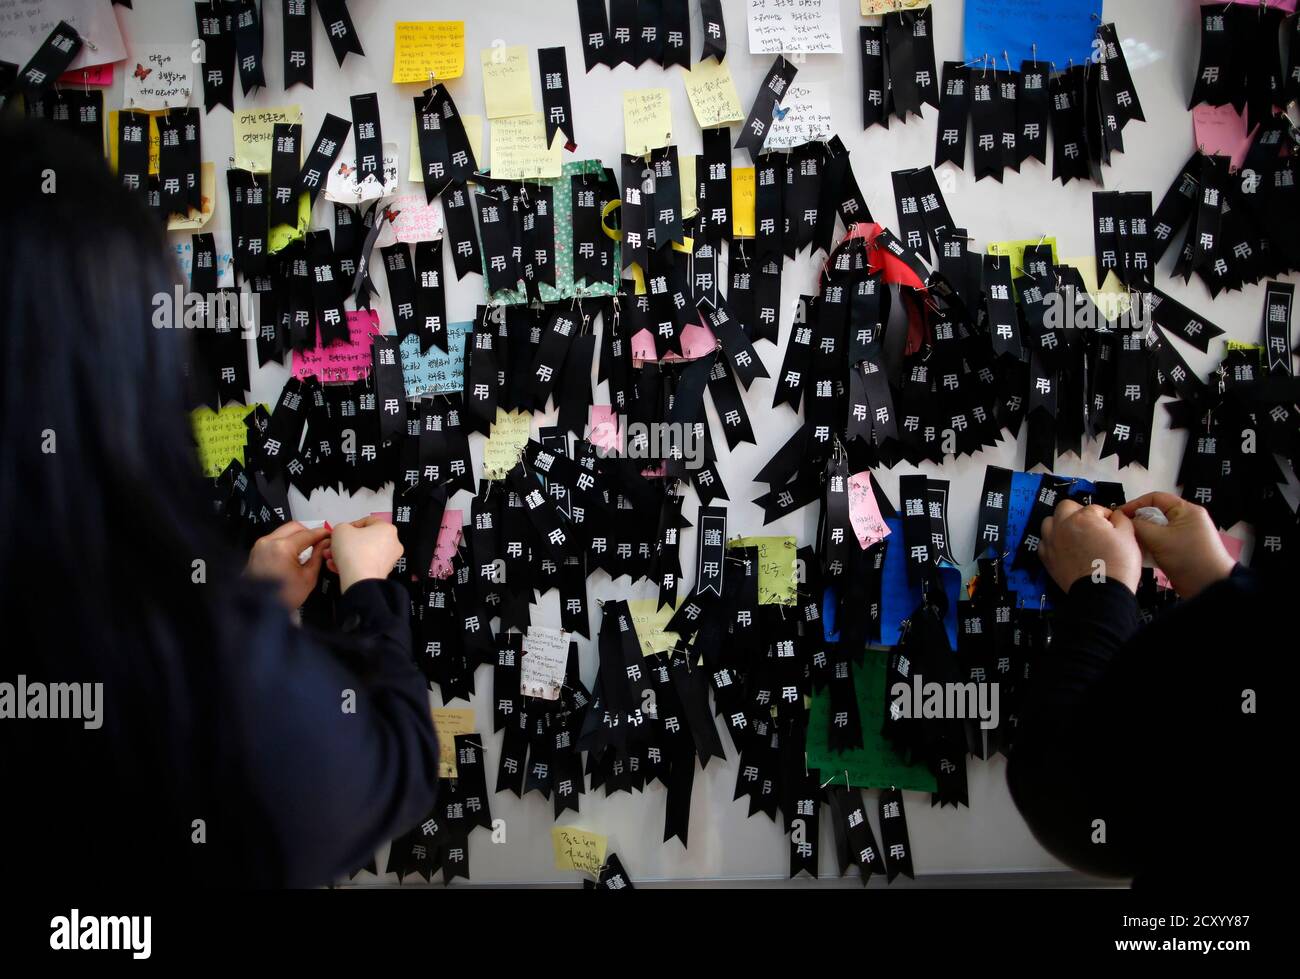 Mourners place black mourning ribbons next to messages for victims of the capsized passenger ship Sewol in Ansan, at a temporary group memorial altar for the victims, April 25, 2014. The Sewol ferry, weighing almost 7,000 tons, sank on a routine trip from the port of Incheon, near Seoul, to the southern holiday island of Jeju. Investigations are focused on human error and mechanical failure. REUTERS/Issei Kato (SOUTH KOREA - Tags: DISASTER MARITIME) Stock Photo